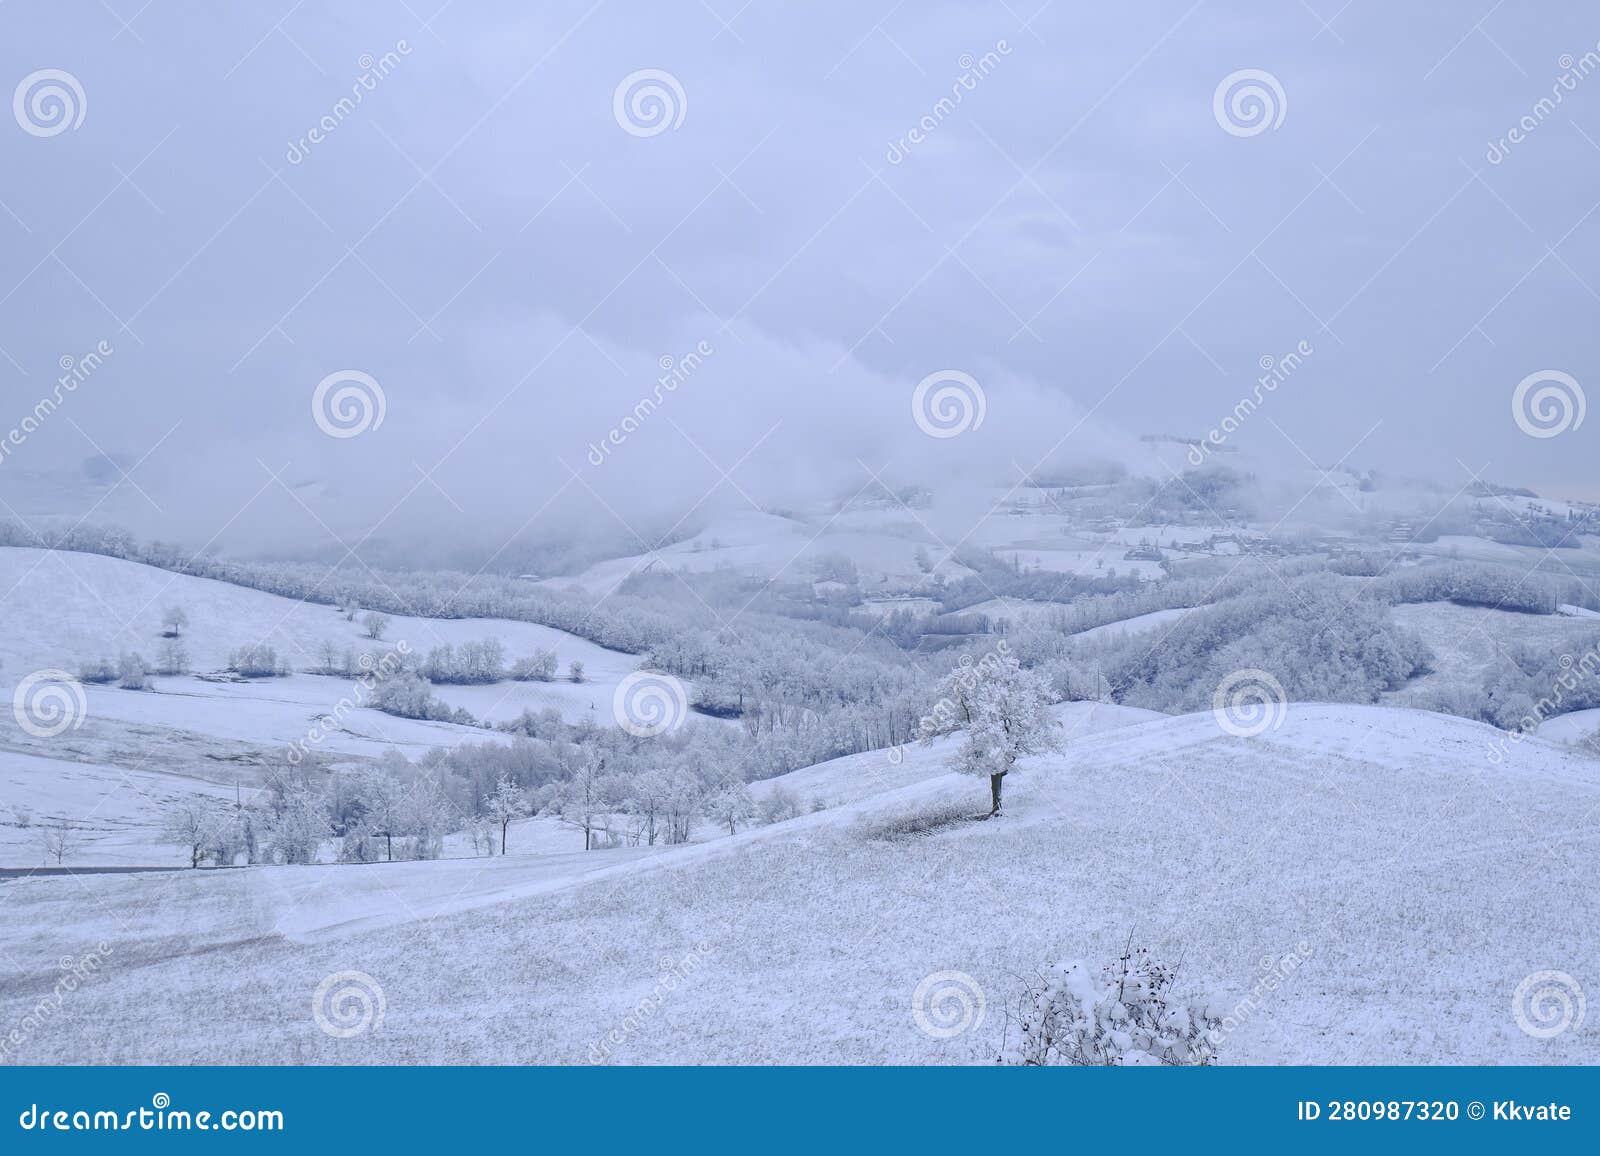 blizzard in the mountains. snowy hills, mountains, nature, horizon. natural background. appennino-tosco-emiliano